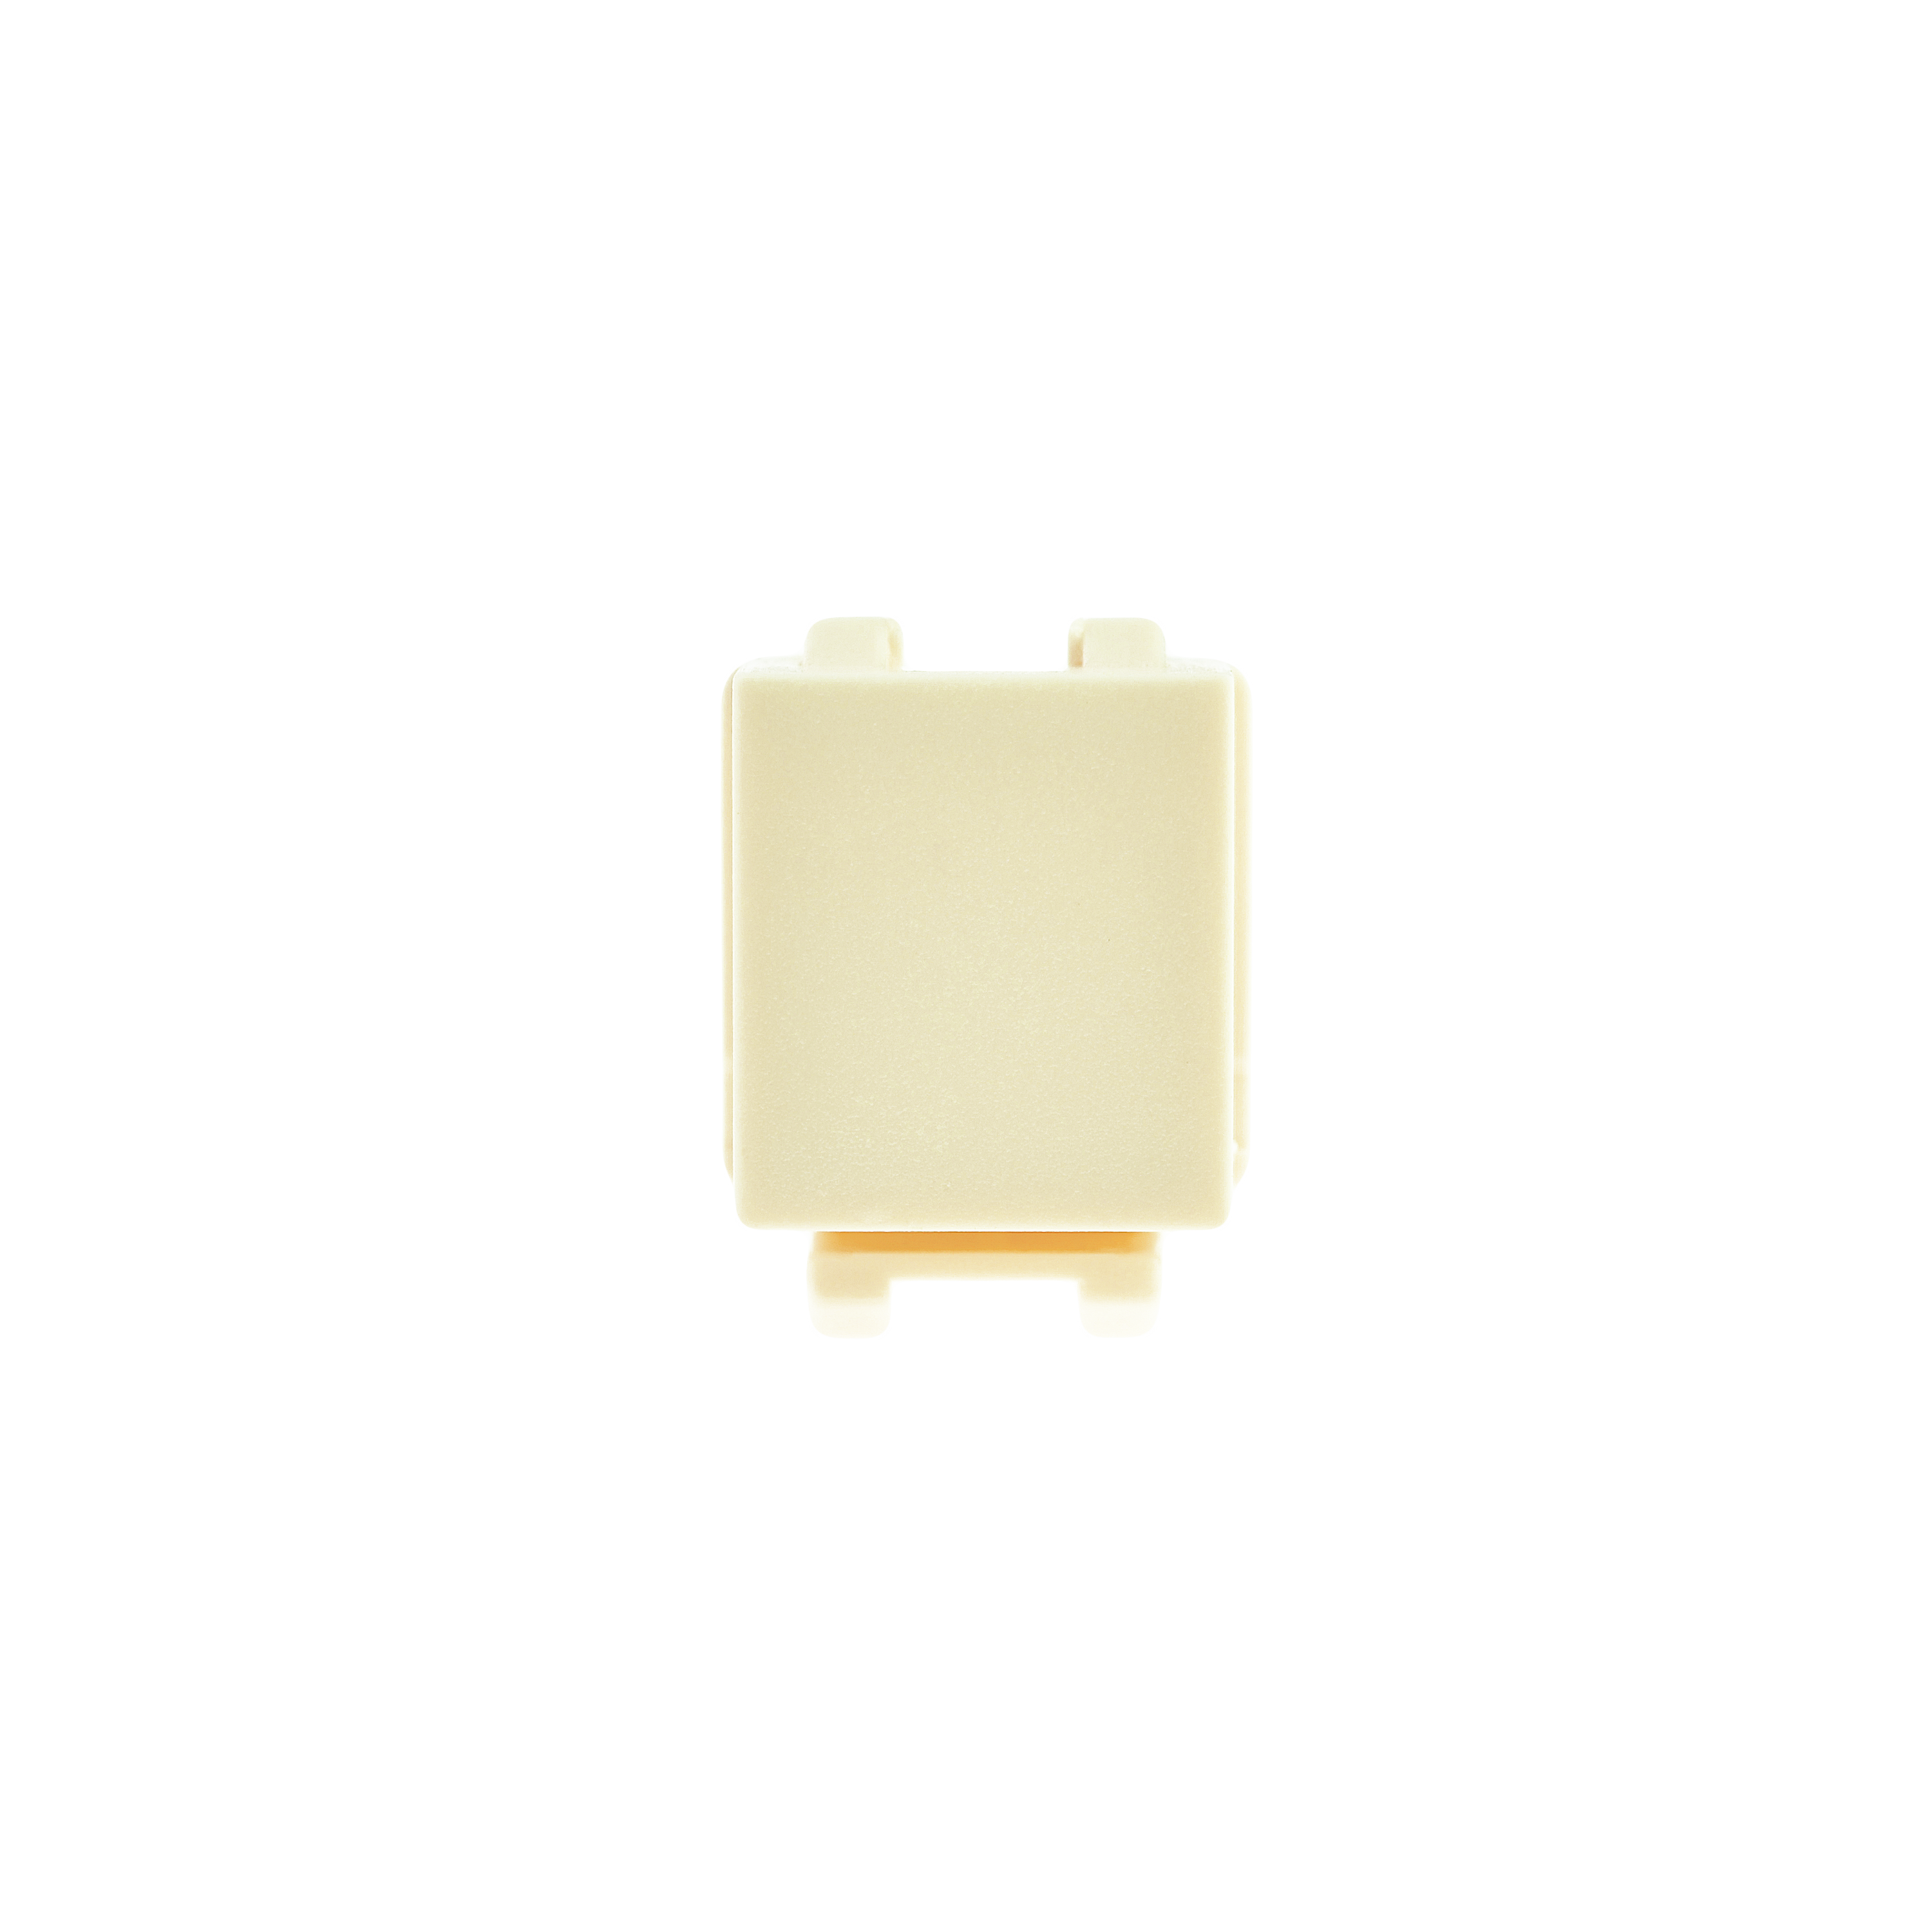 40x Snap-in Keystone for Wall Plate Blank Insert White 